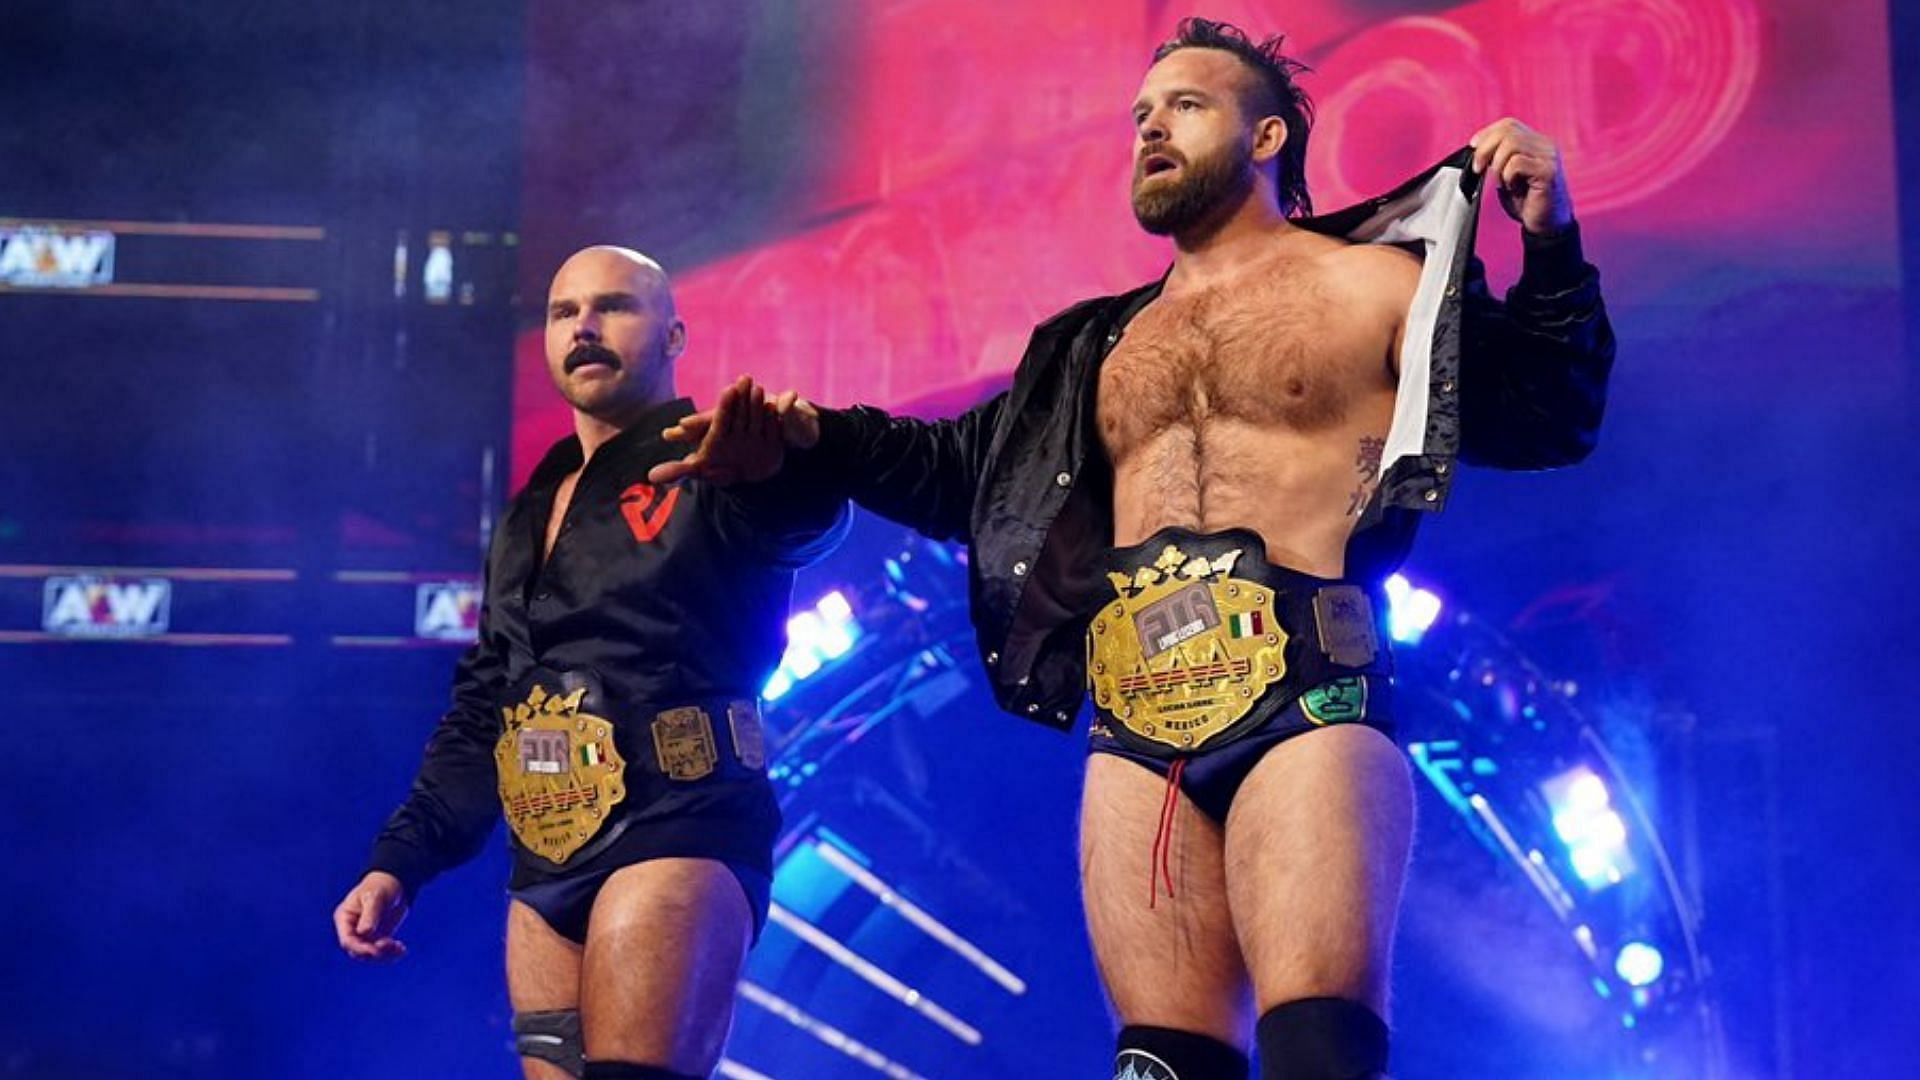 FTR is one of the the top tag teams in AEW